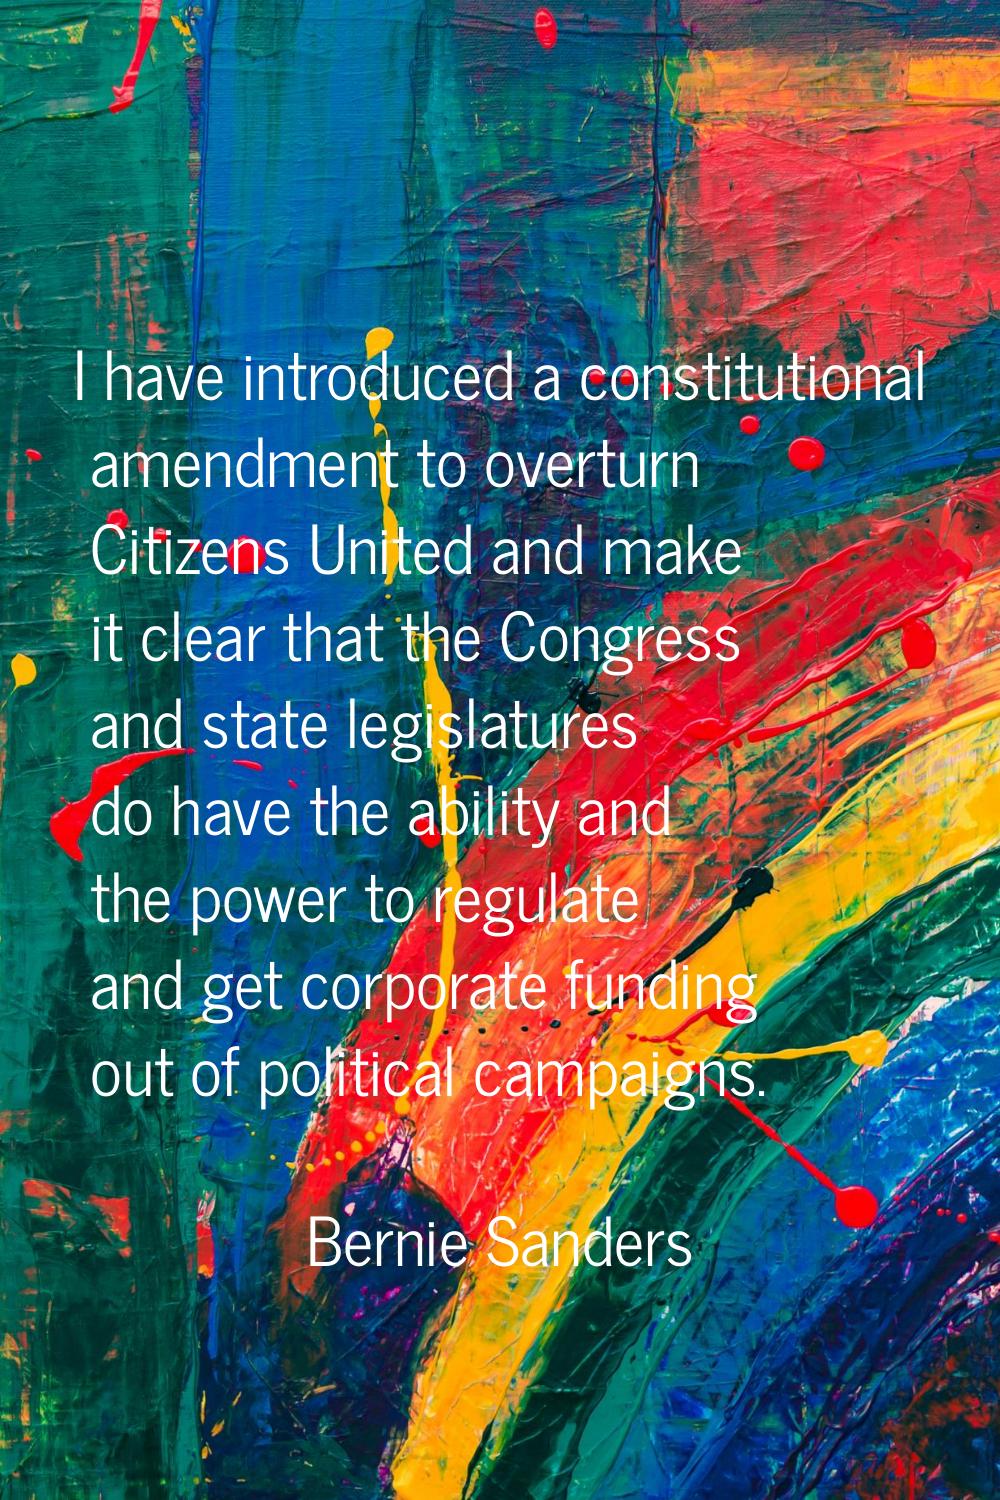 I have introduced a constitutional amendment to overturn Citizens United and make it clear that the